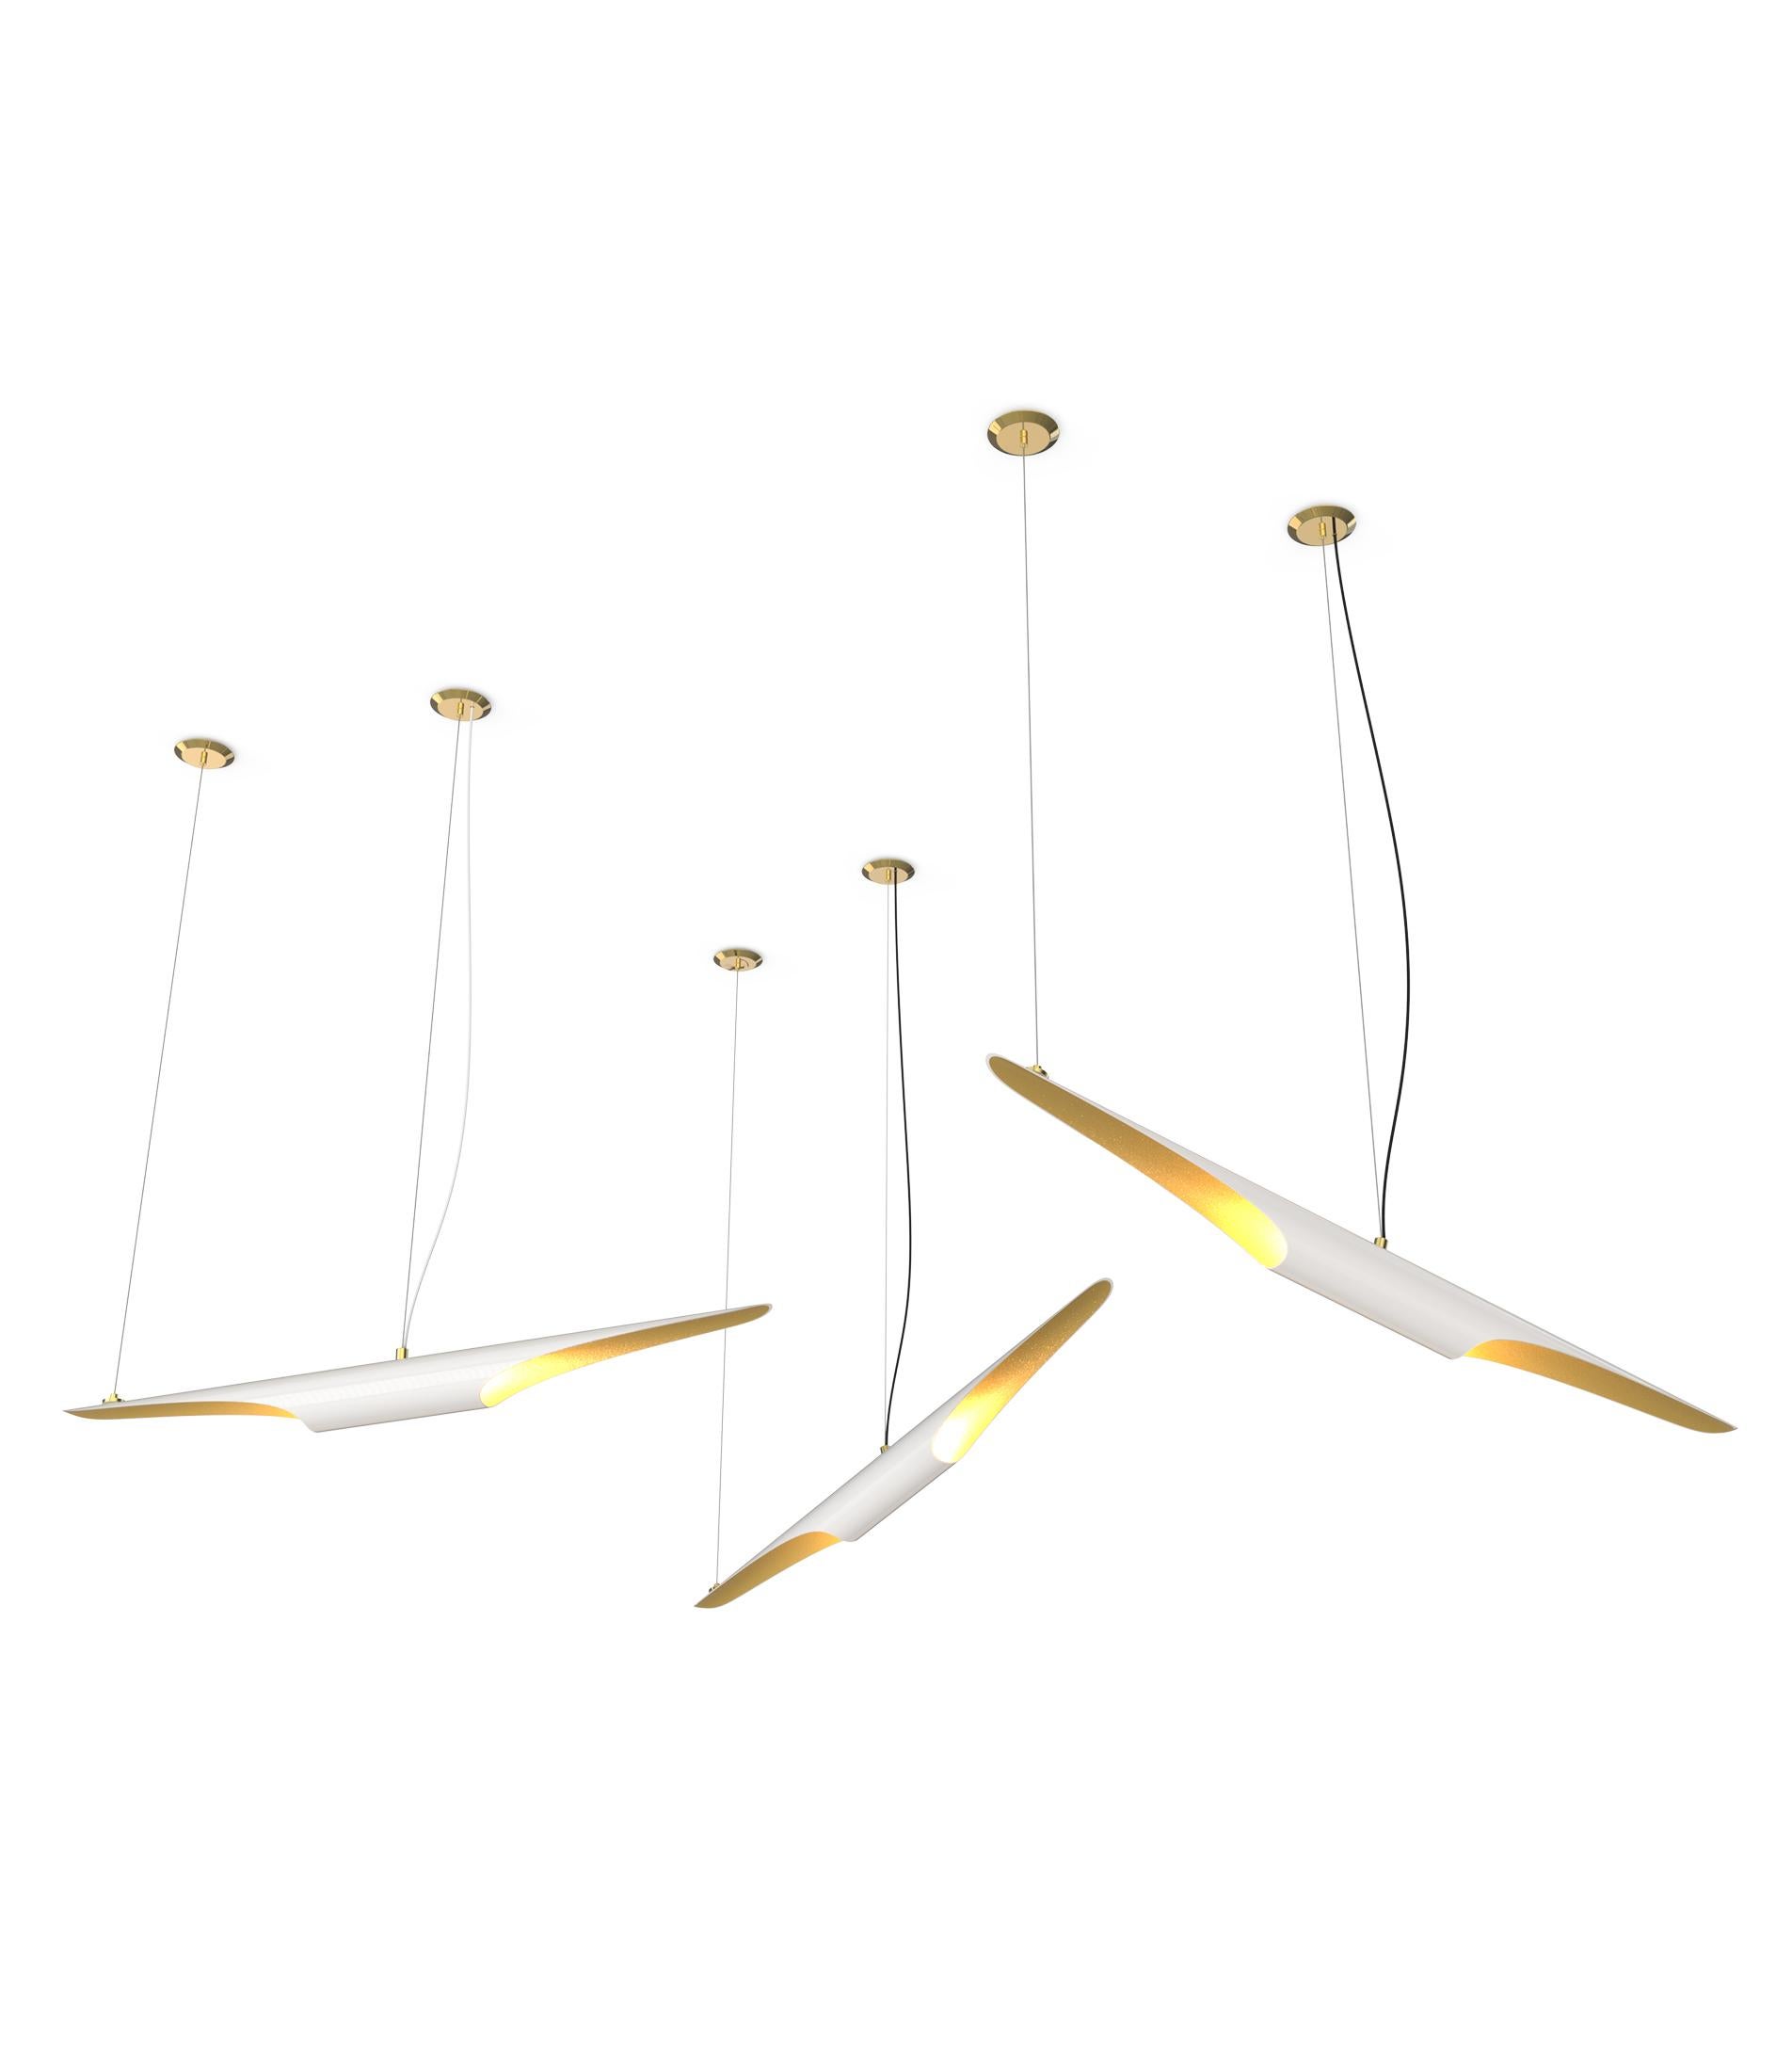 Mid-Century Modern Coltrane Steel Suspension Light by Delightfull

Mid-Century Modern Coltrane Steel Suspension Light by Delightfull is one of Delightfull’s top best sellers. Coltrane is a simple suspended ceiling light, which is handmade in steel.